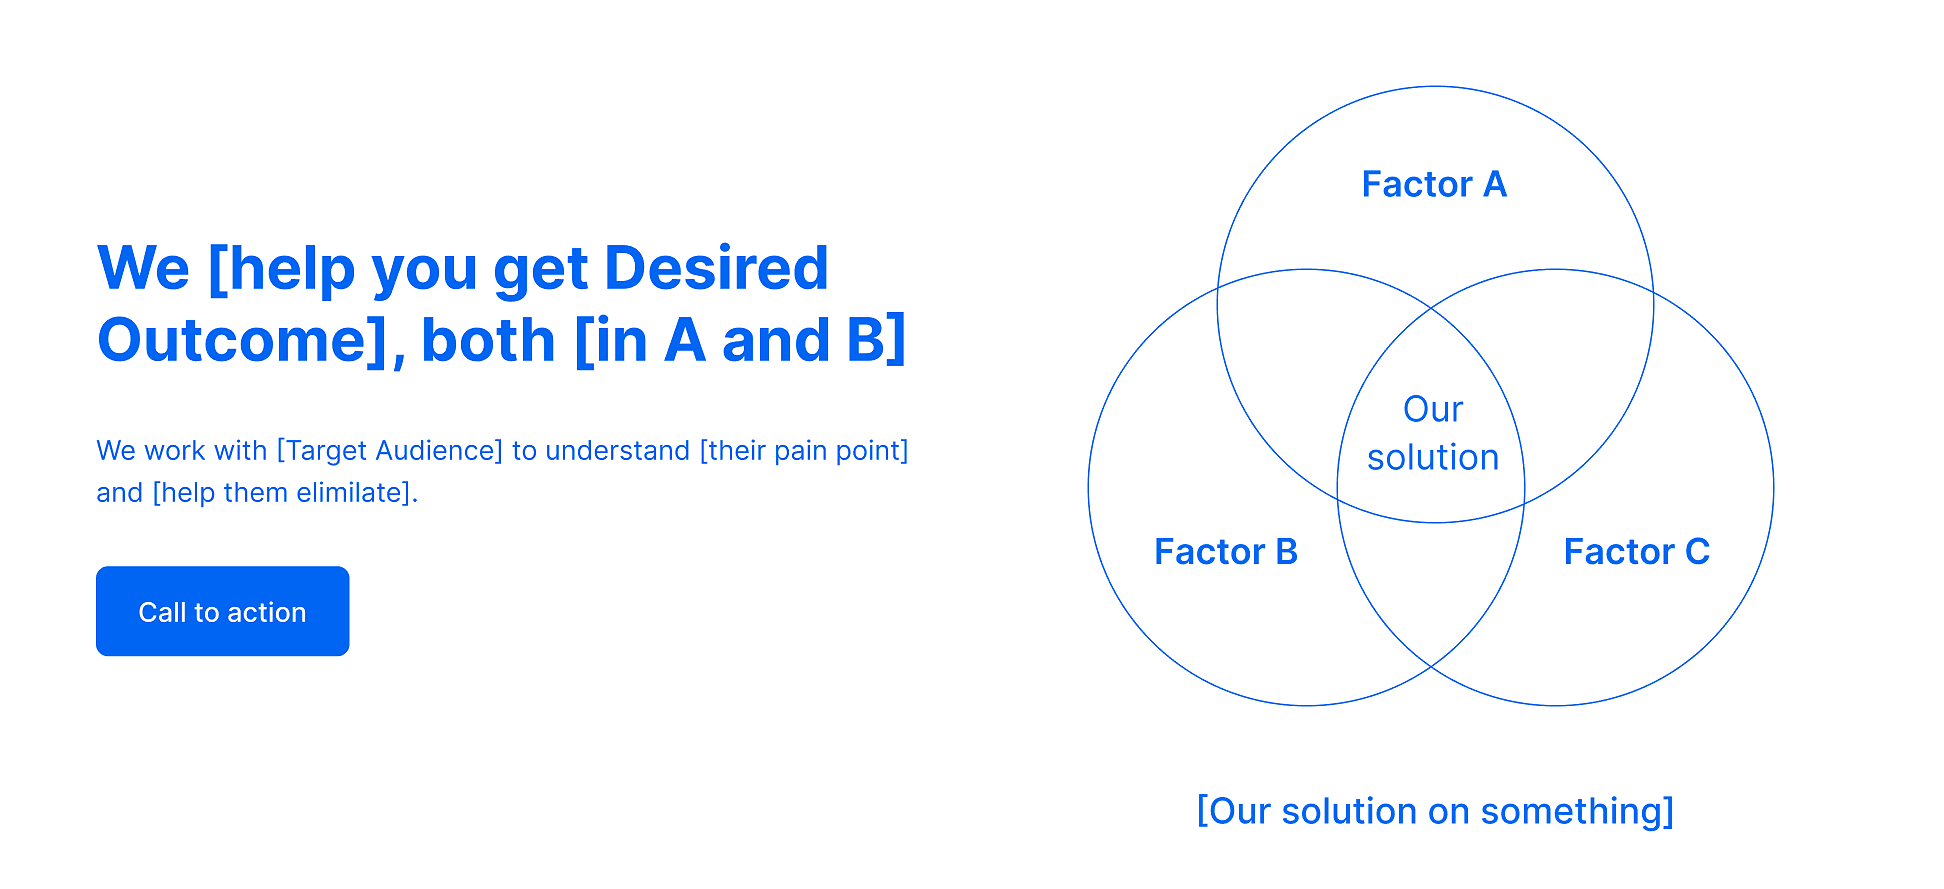 Blueprint of our solution will help you both in many ways